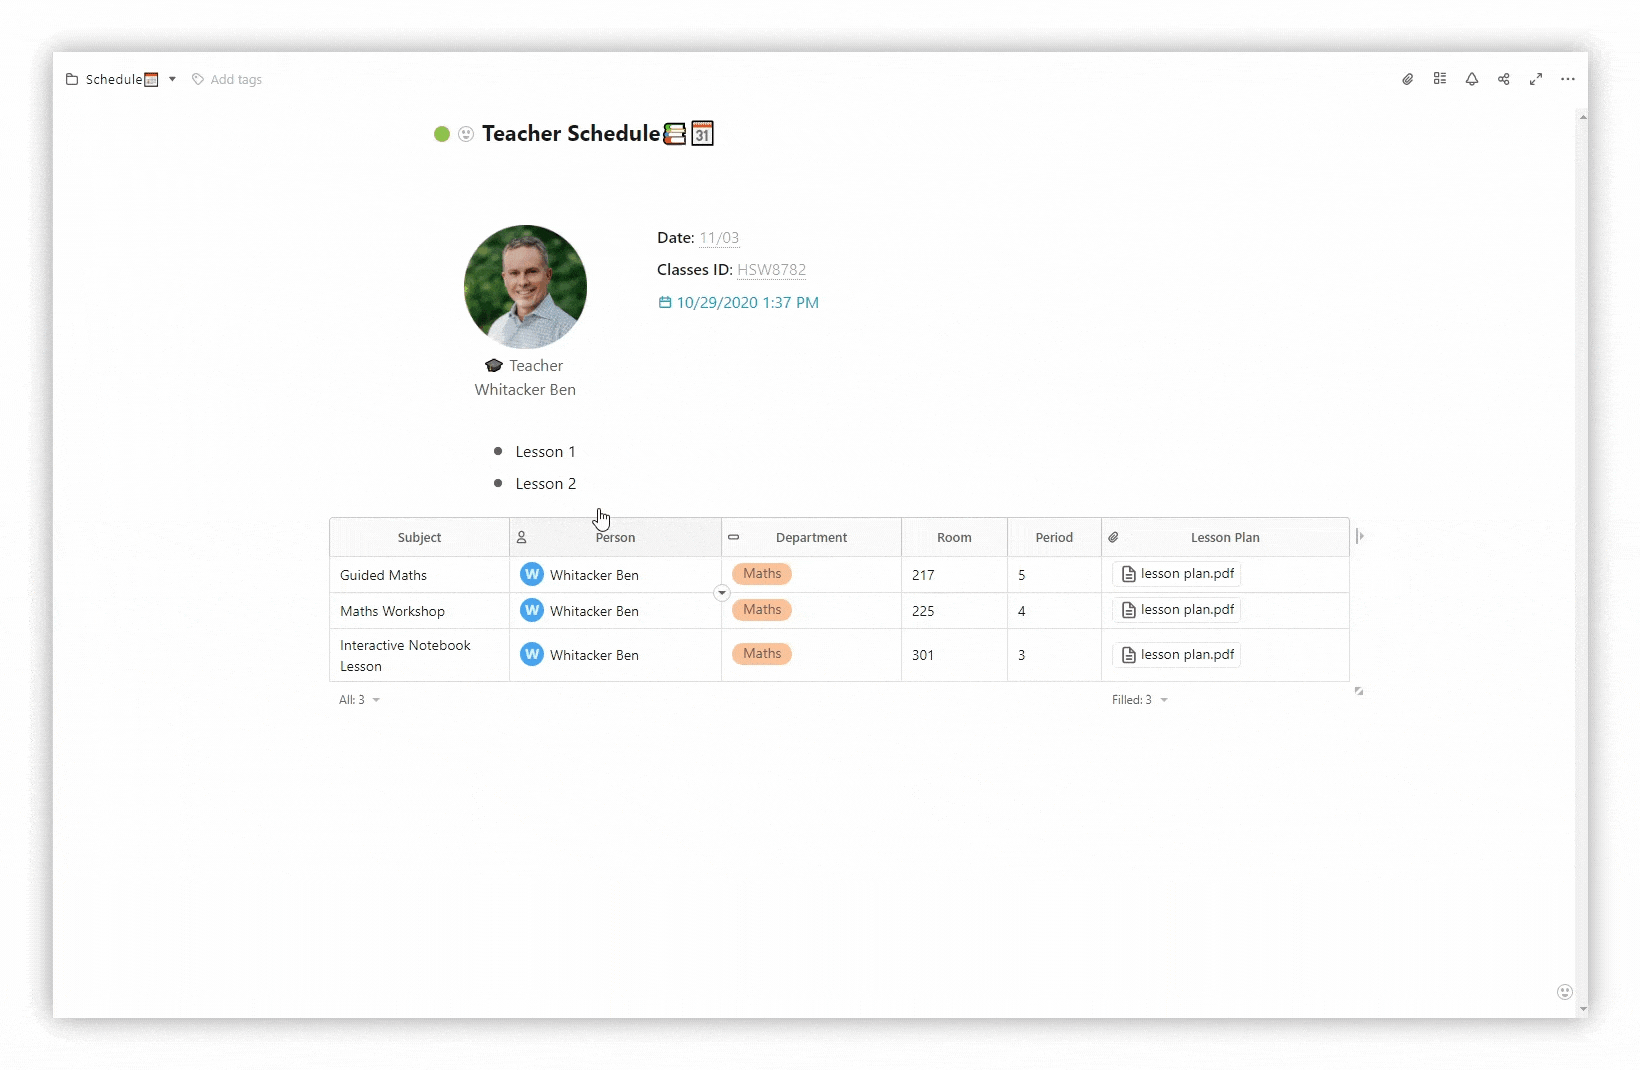 How to add a page to a task?